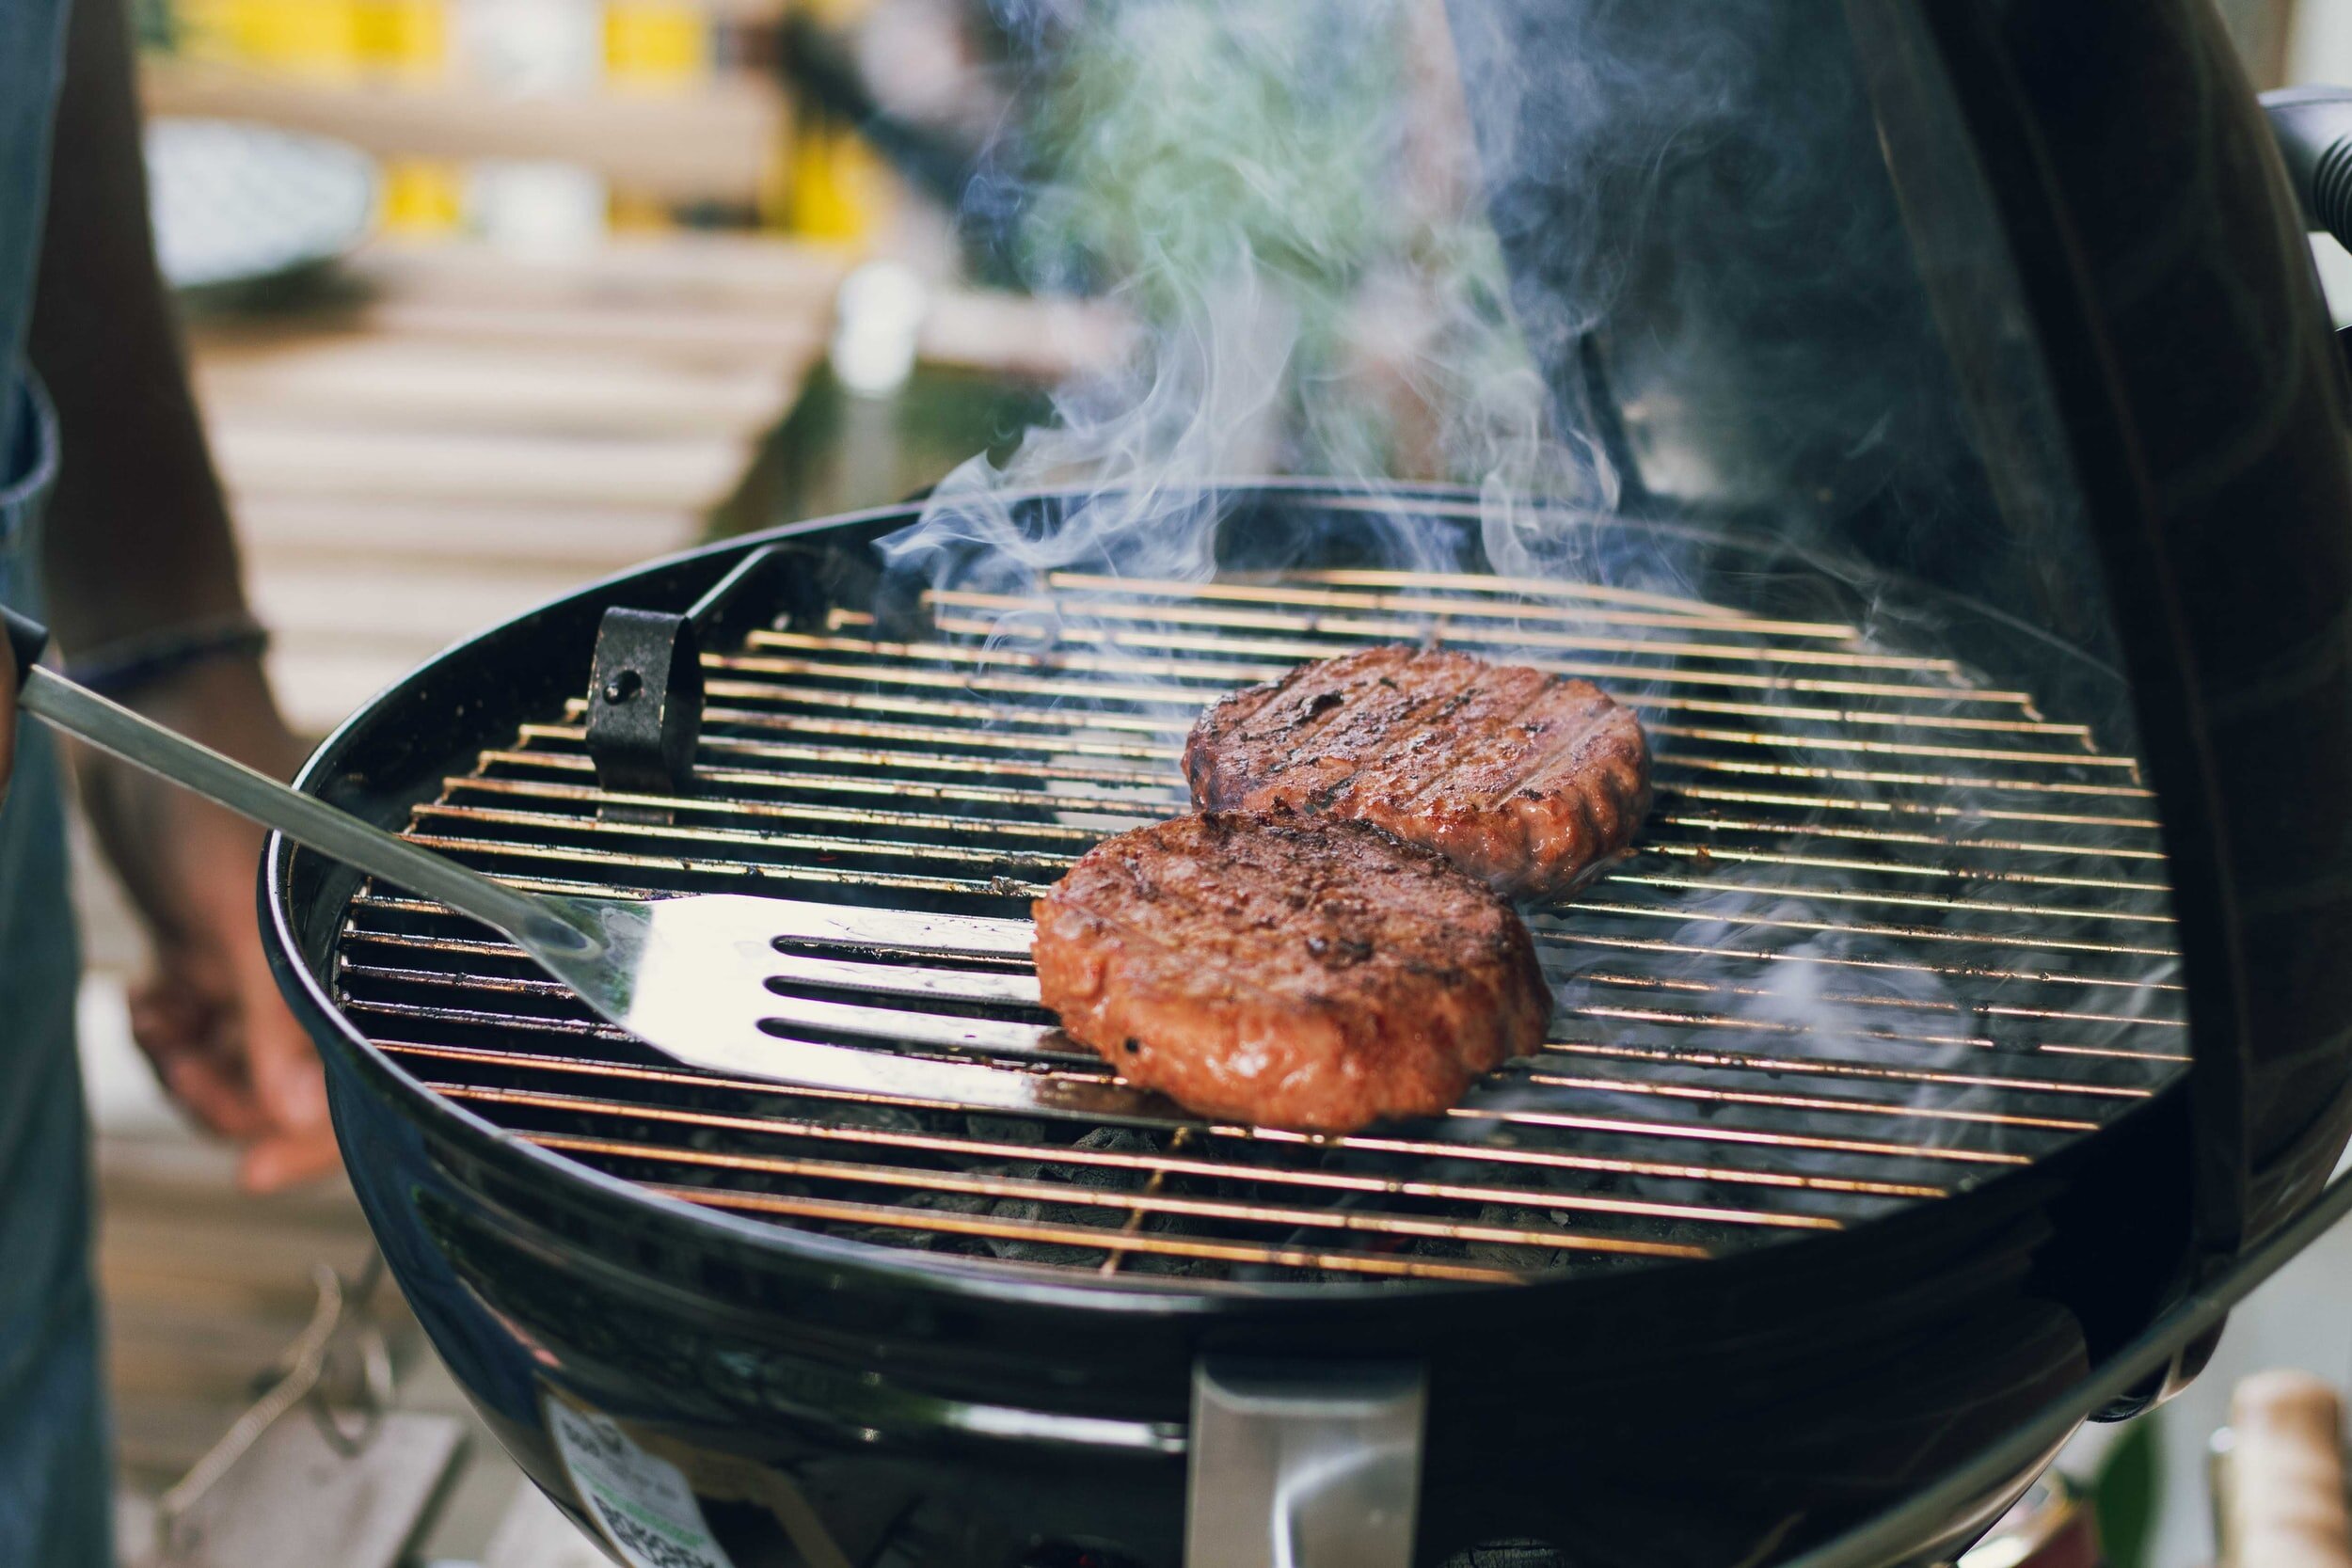 Image of two brugers being cooked on a small black charcoal grill. Photo by Maude Frédérique Lavoie on Unsplash